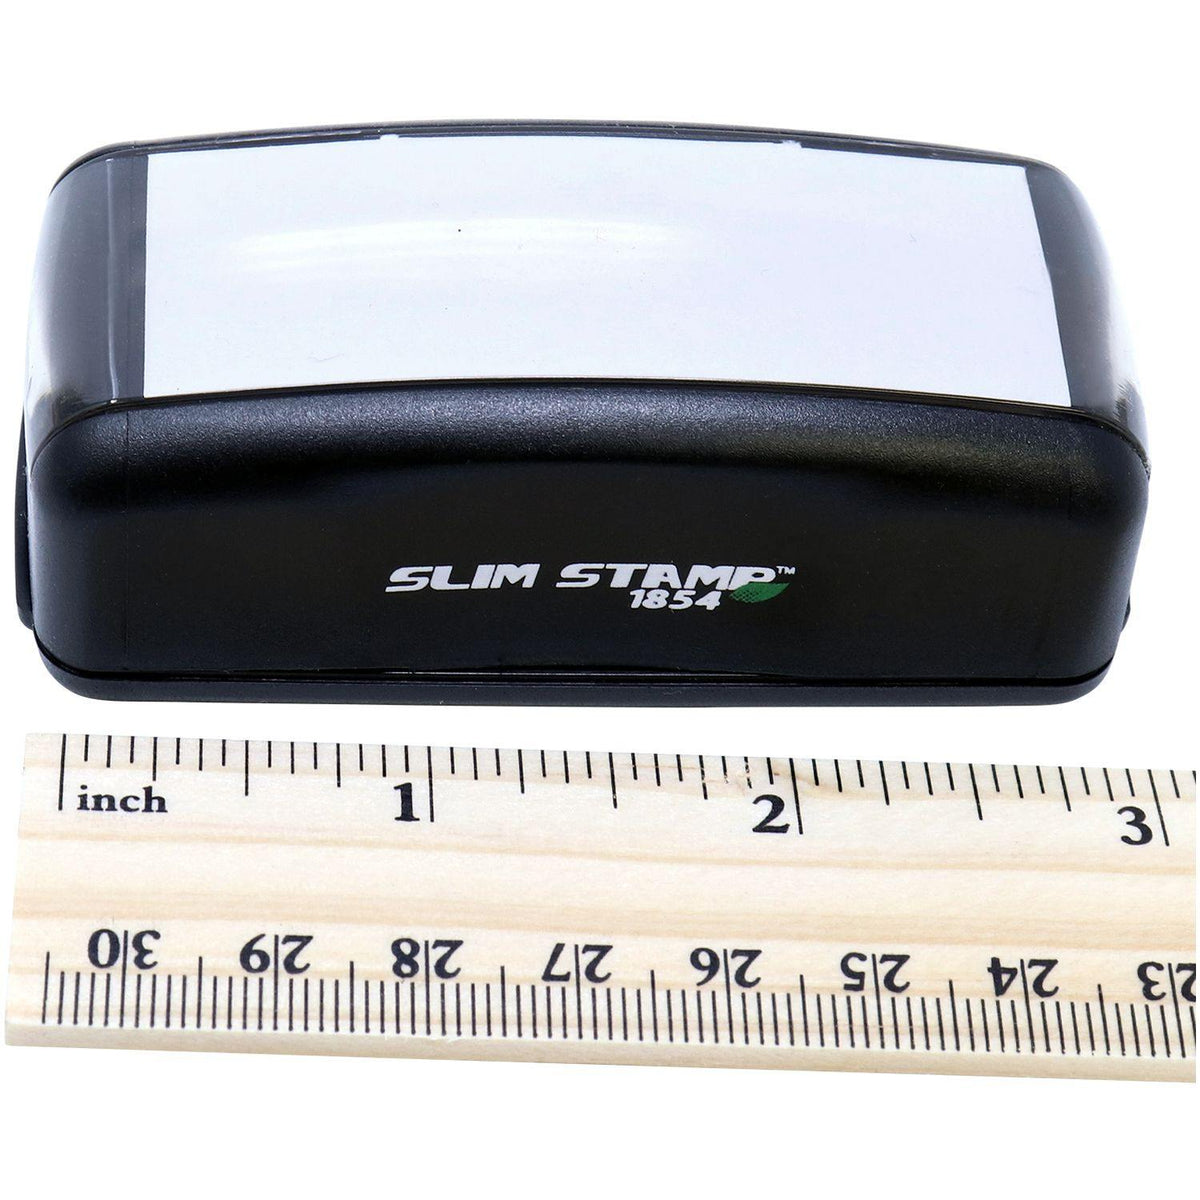 Measurement Large Pre Inked Wealth Management Stamp with Ruler